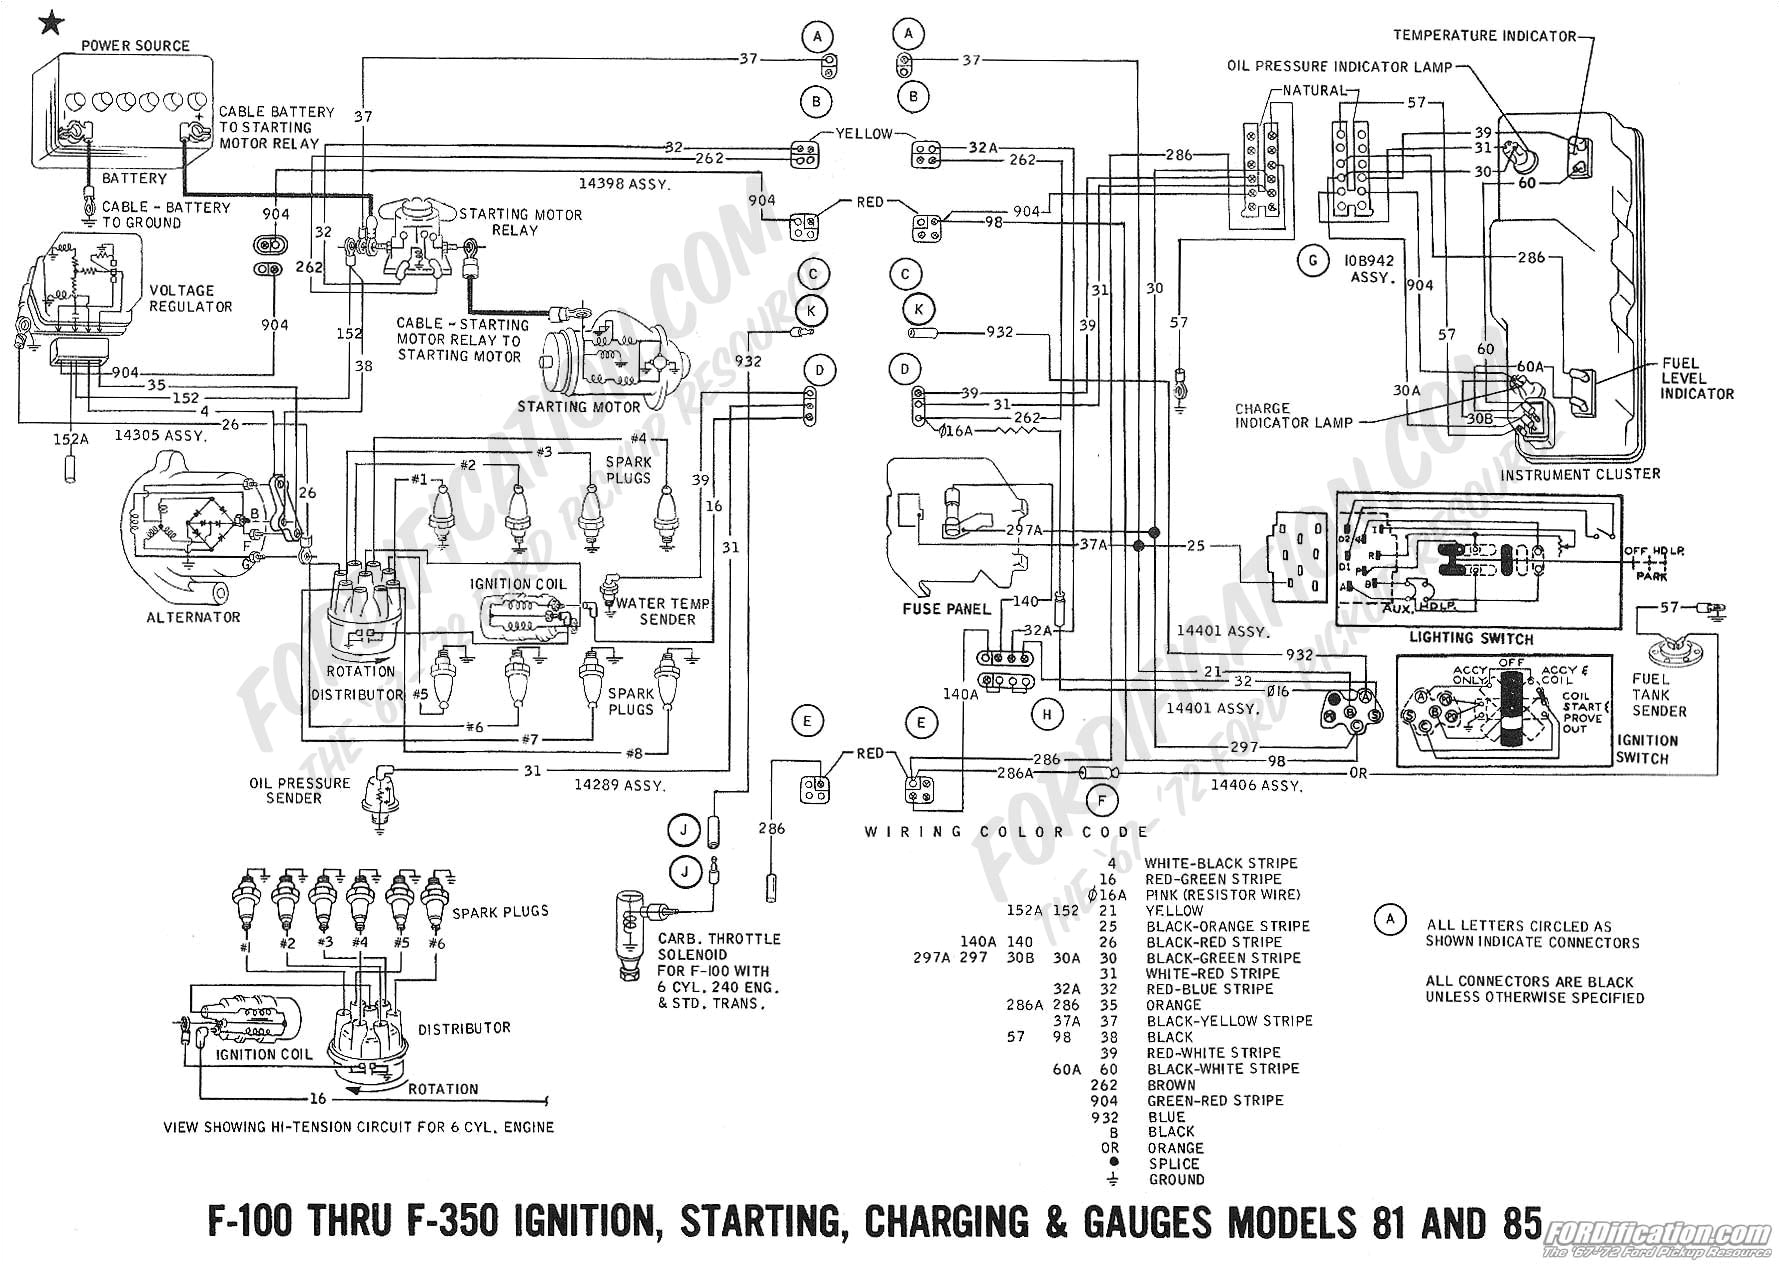 1970 ford f100 wiring harness wiring diagram datasource 1970 f100 wiring diagram 1970 f100 wiring diagram